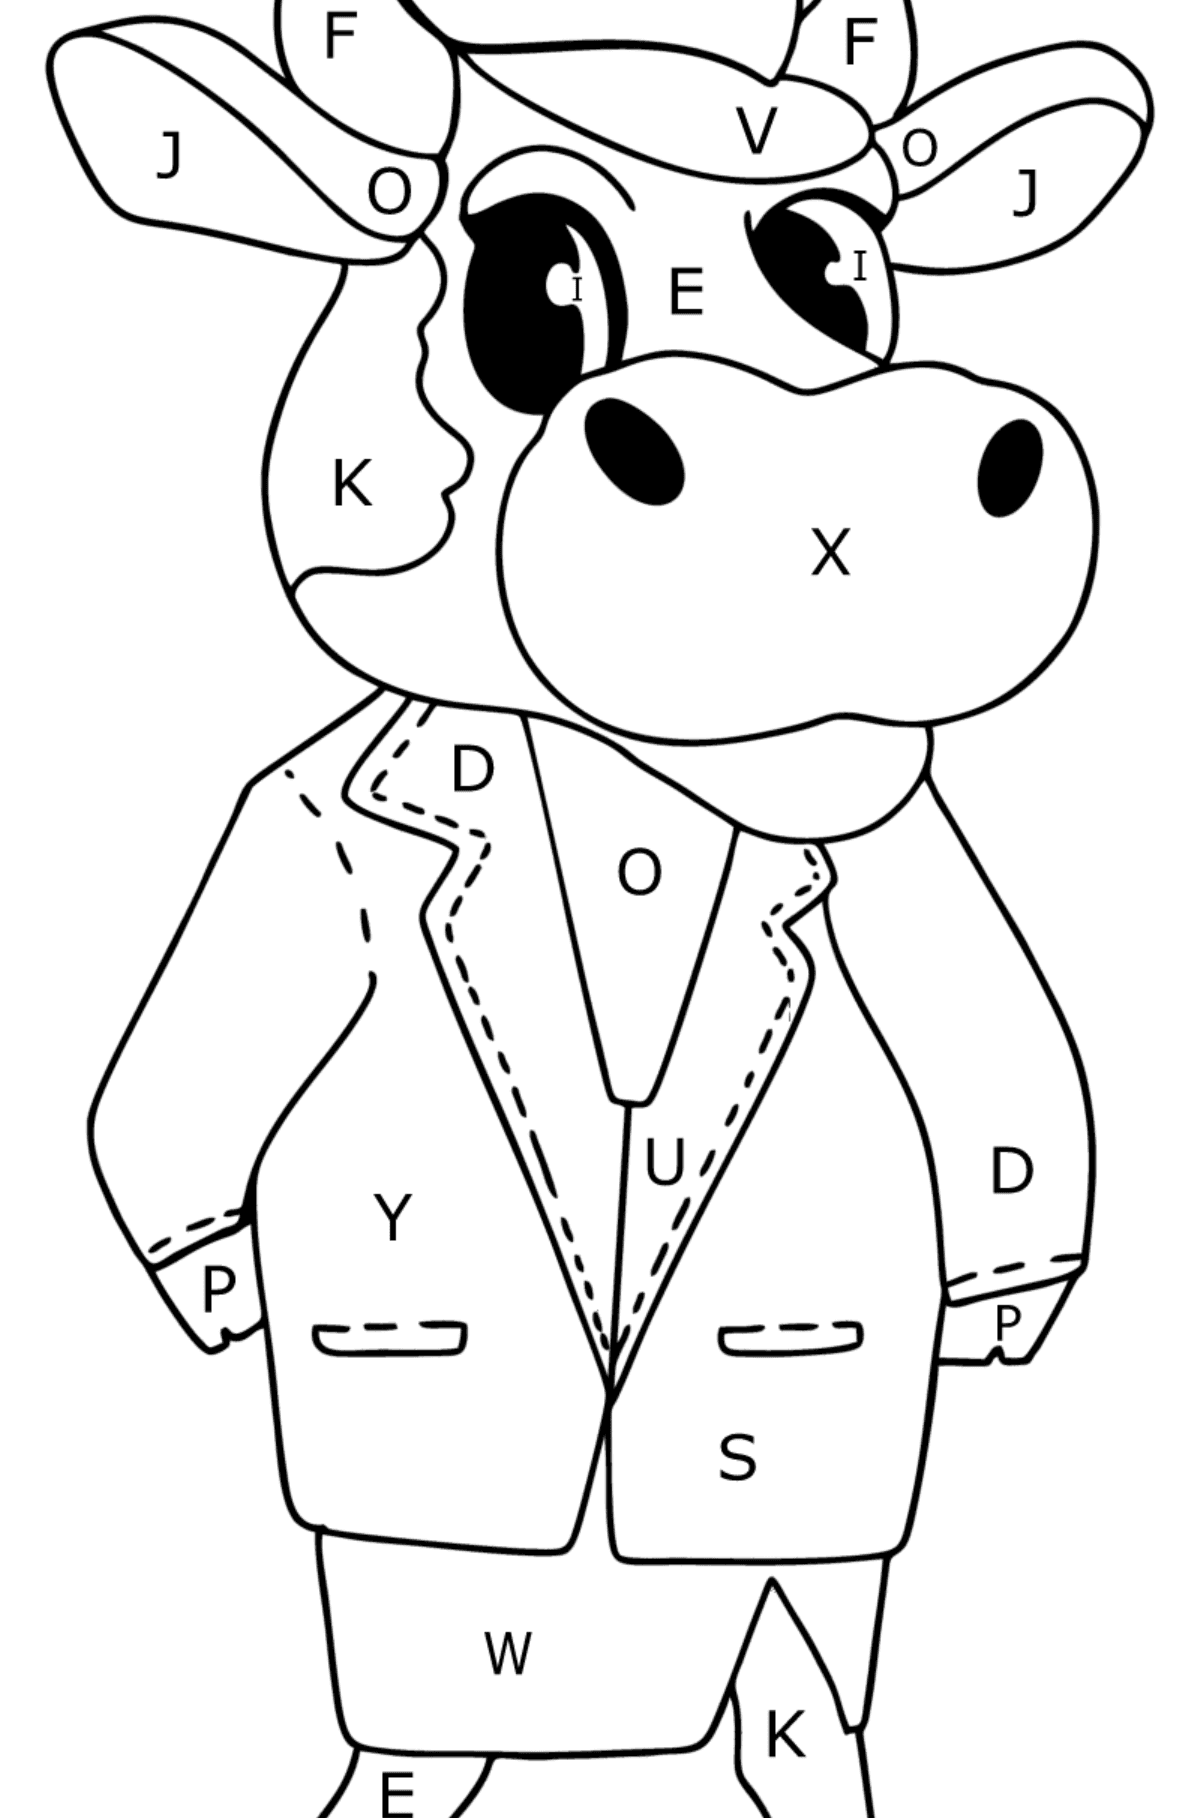 Cartoon cow coloring page - Coloring by Letters for Kids